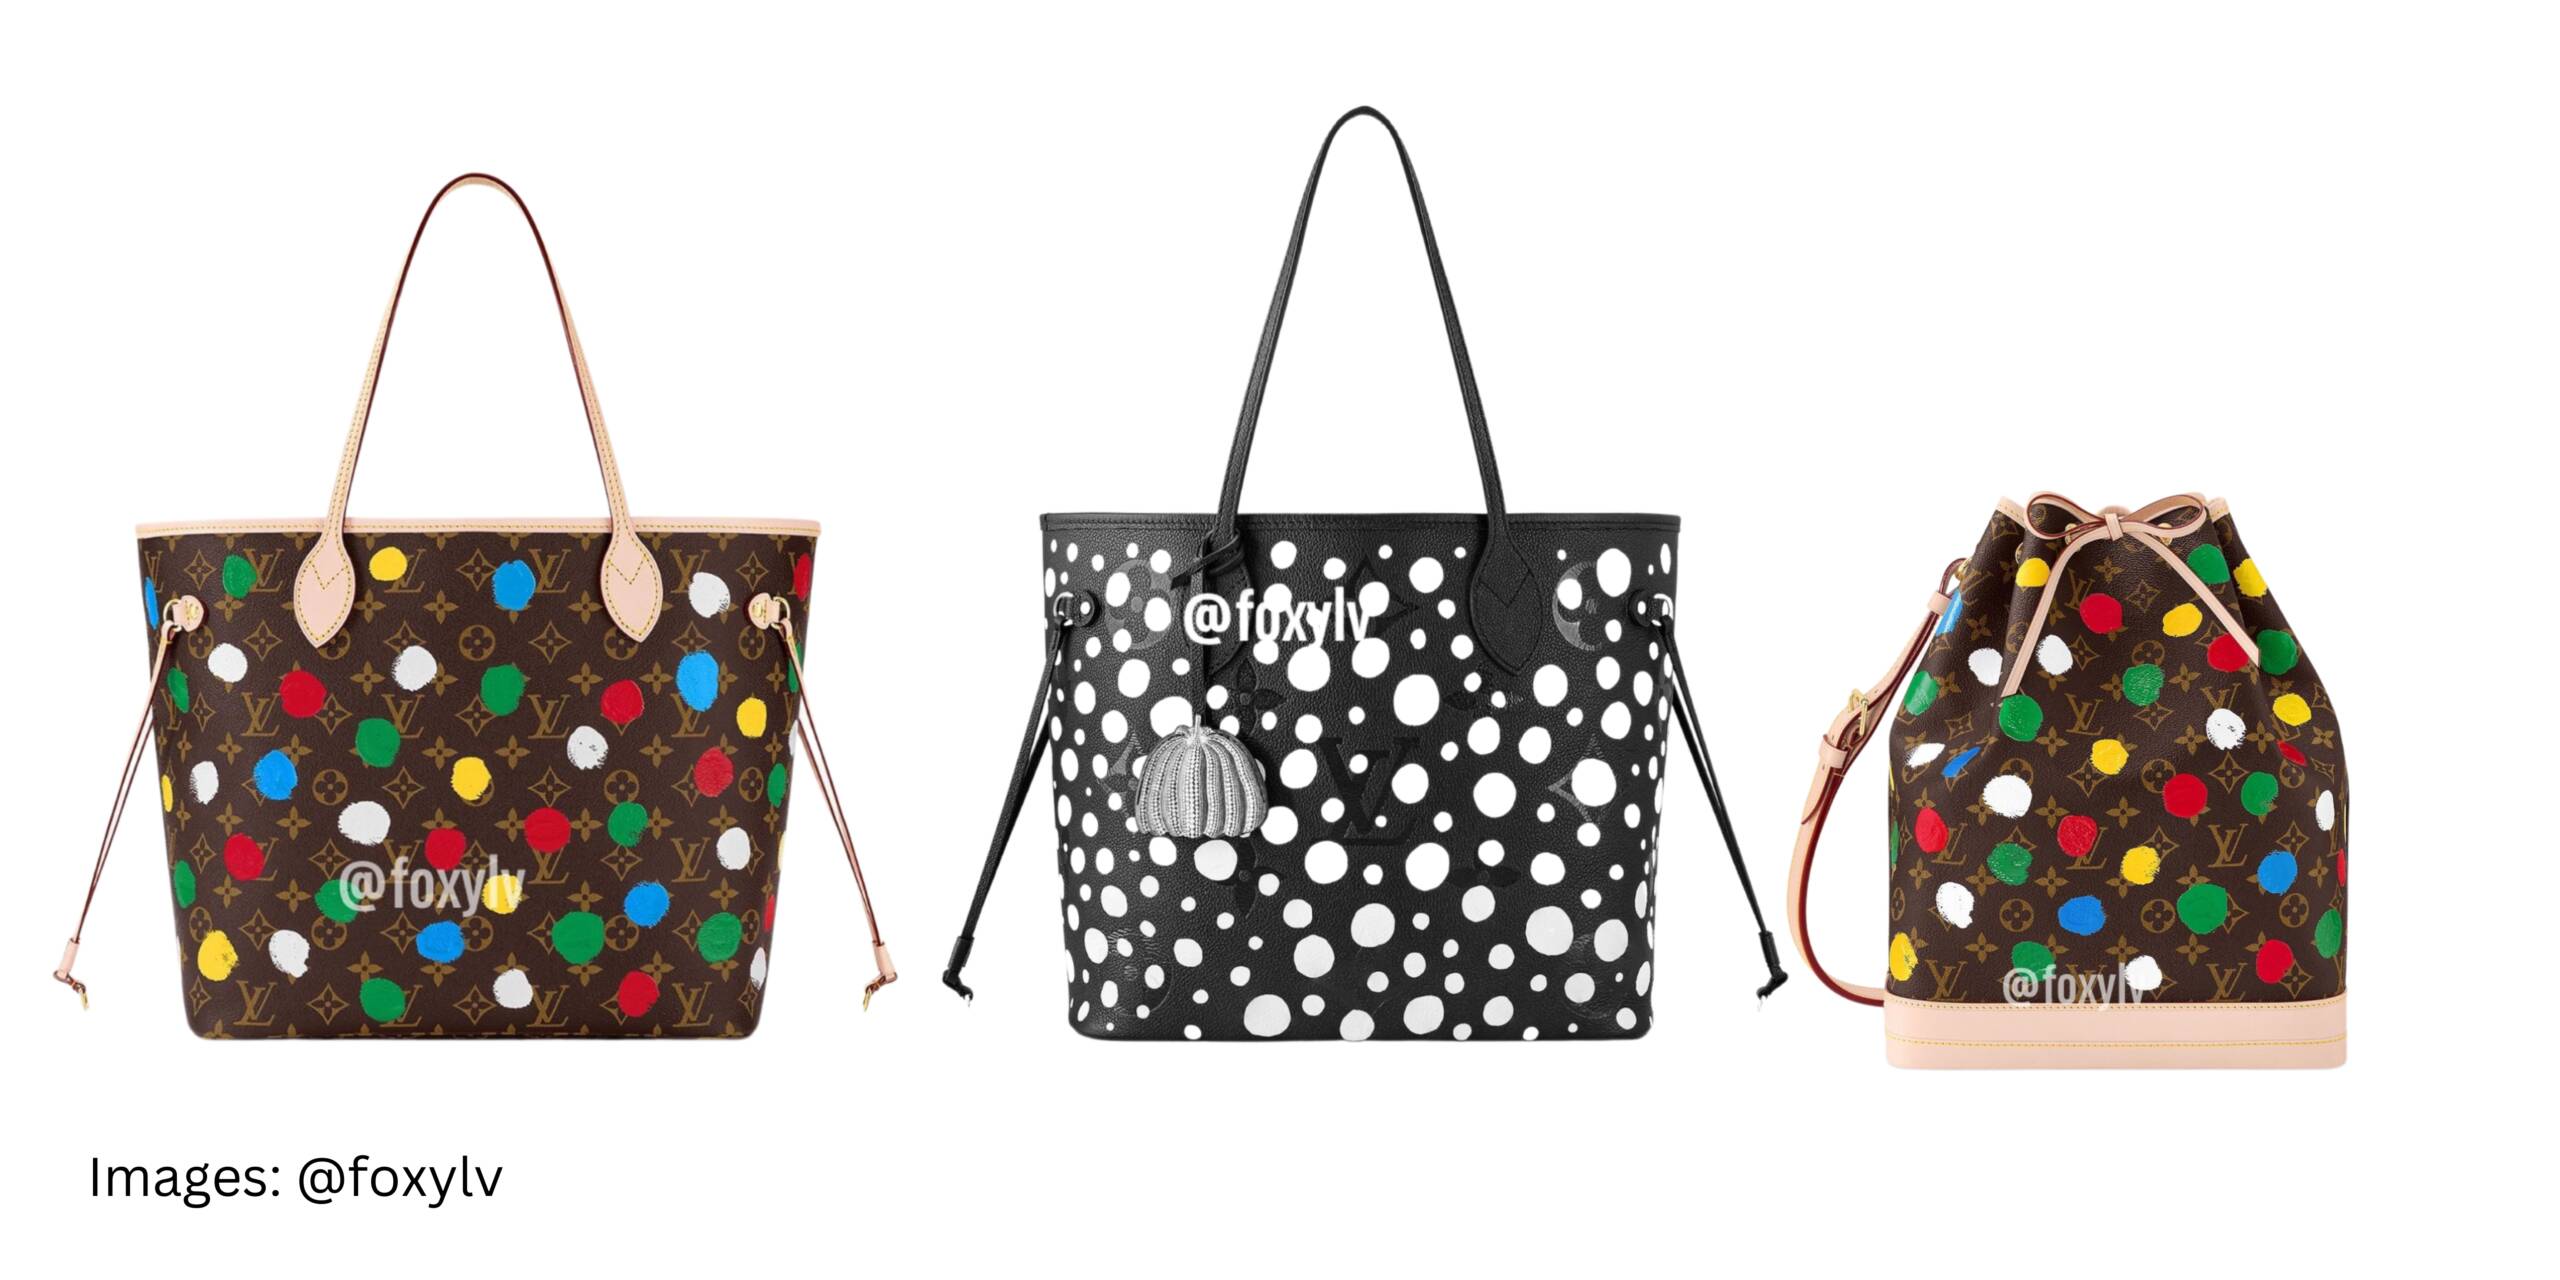 LINE releases Louis Vuitton x Yayoi Kusama LINE Stickers